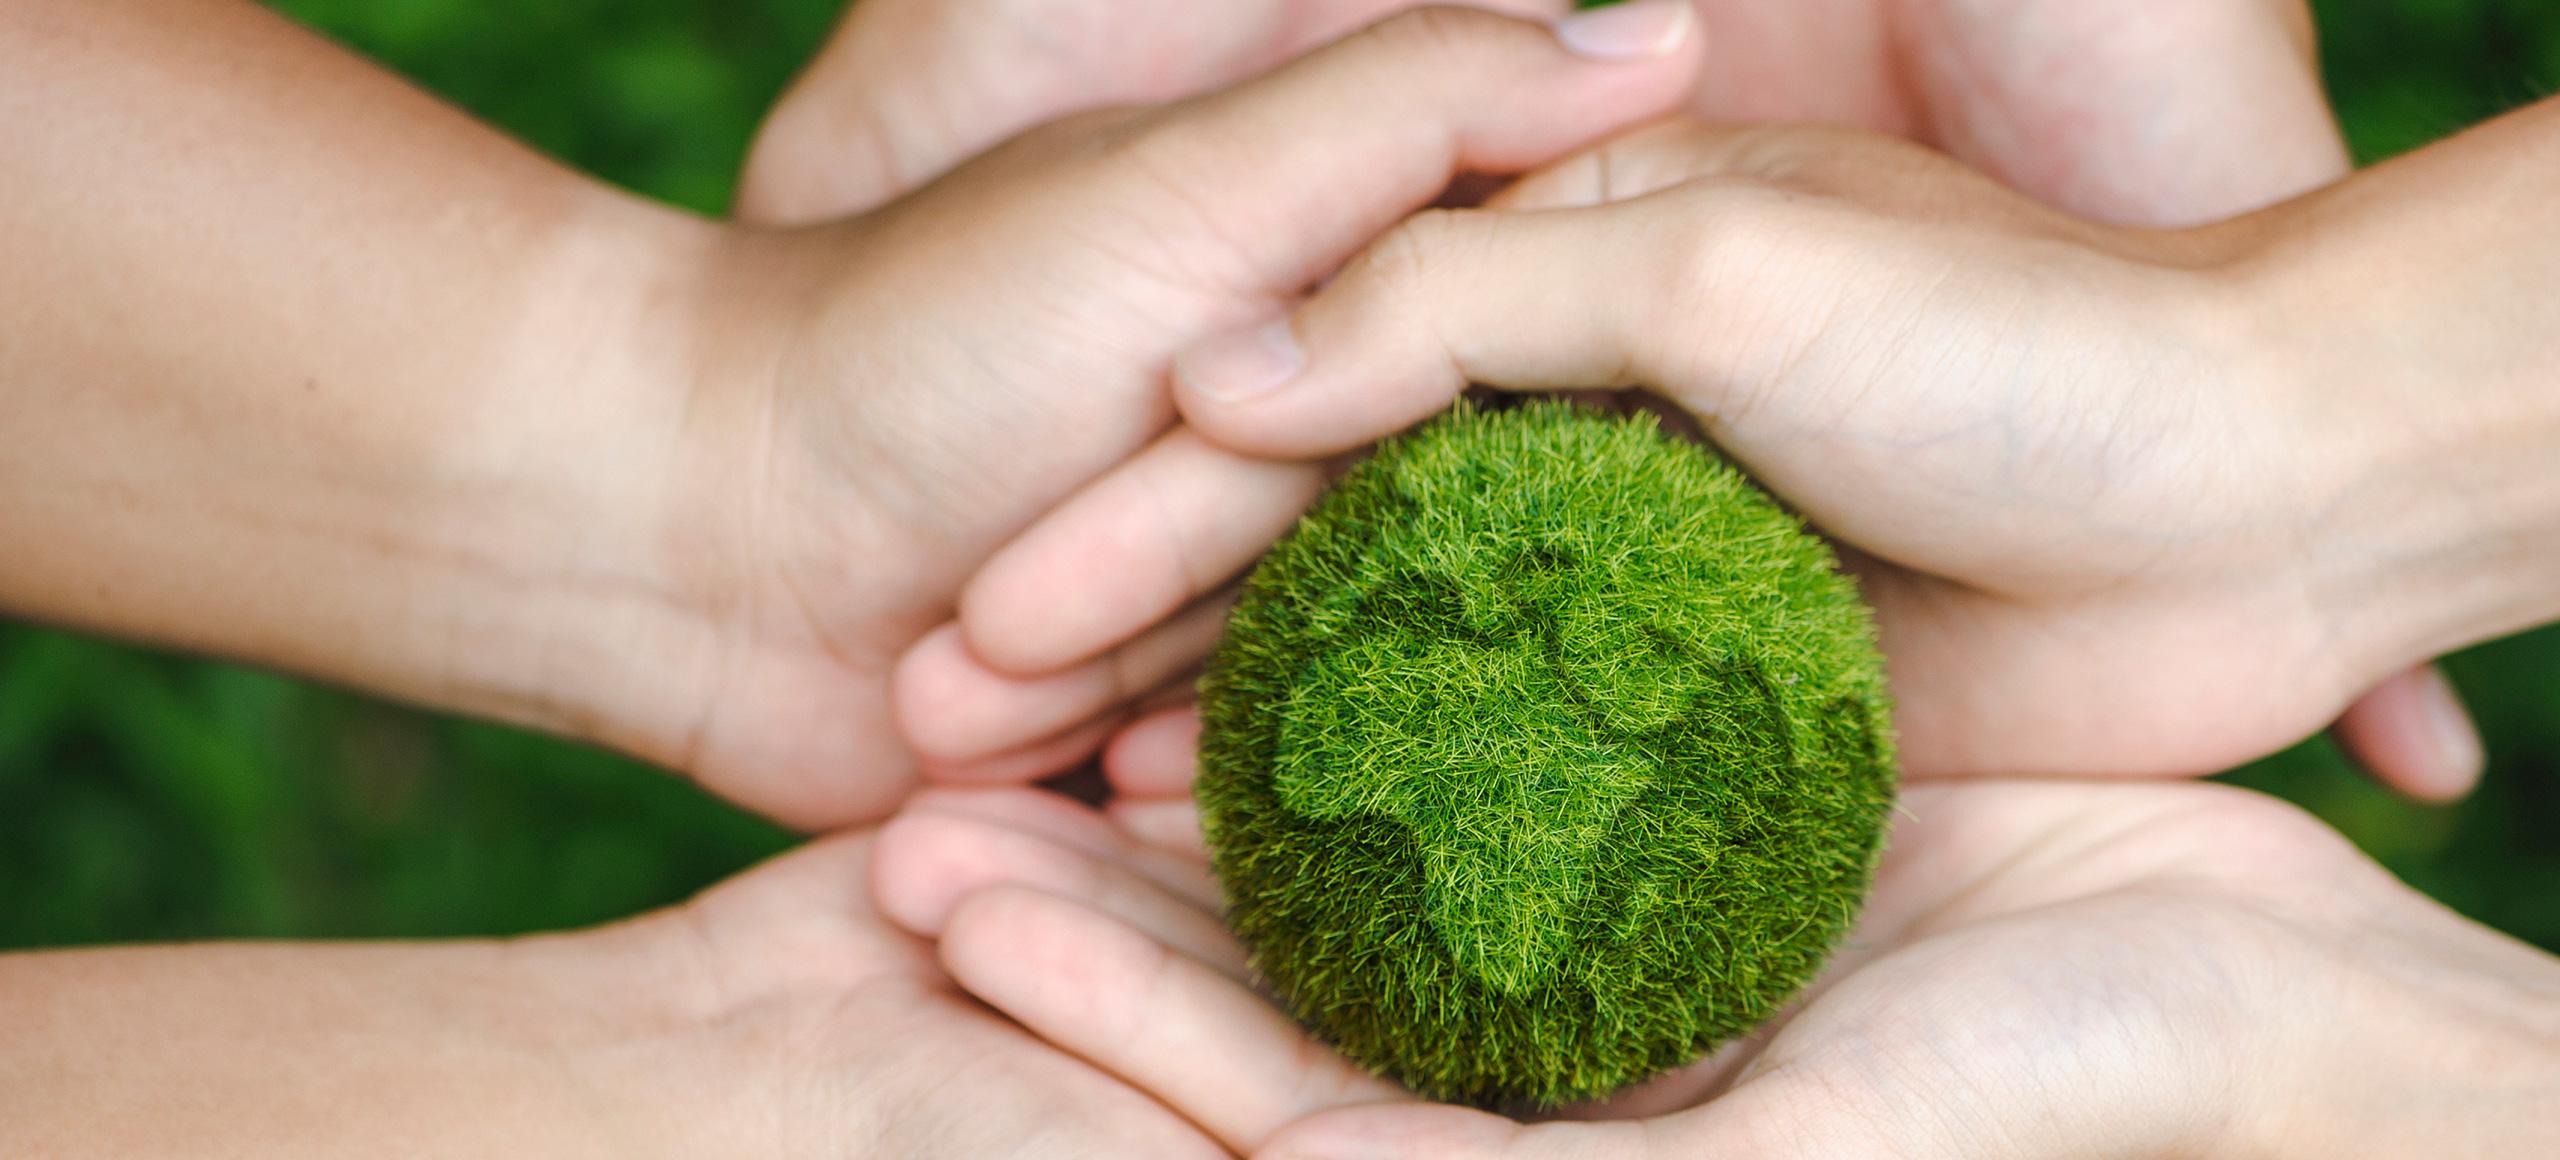 Hands holding a green earth